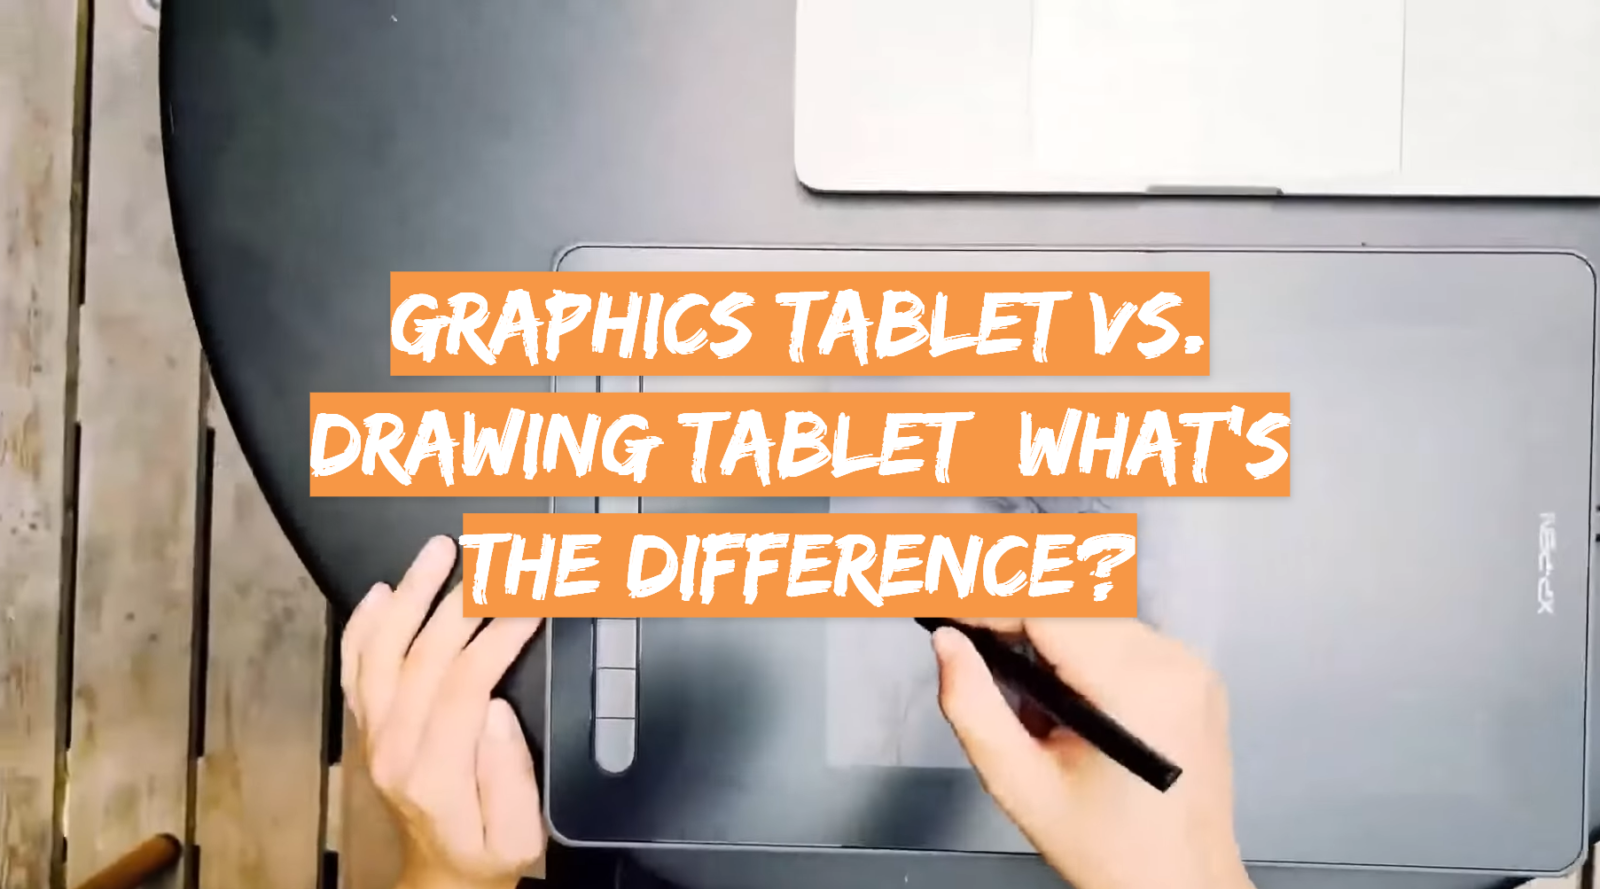 Graphics Tablet vs. Drawing Tablet: What’s the Difference?